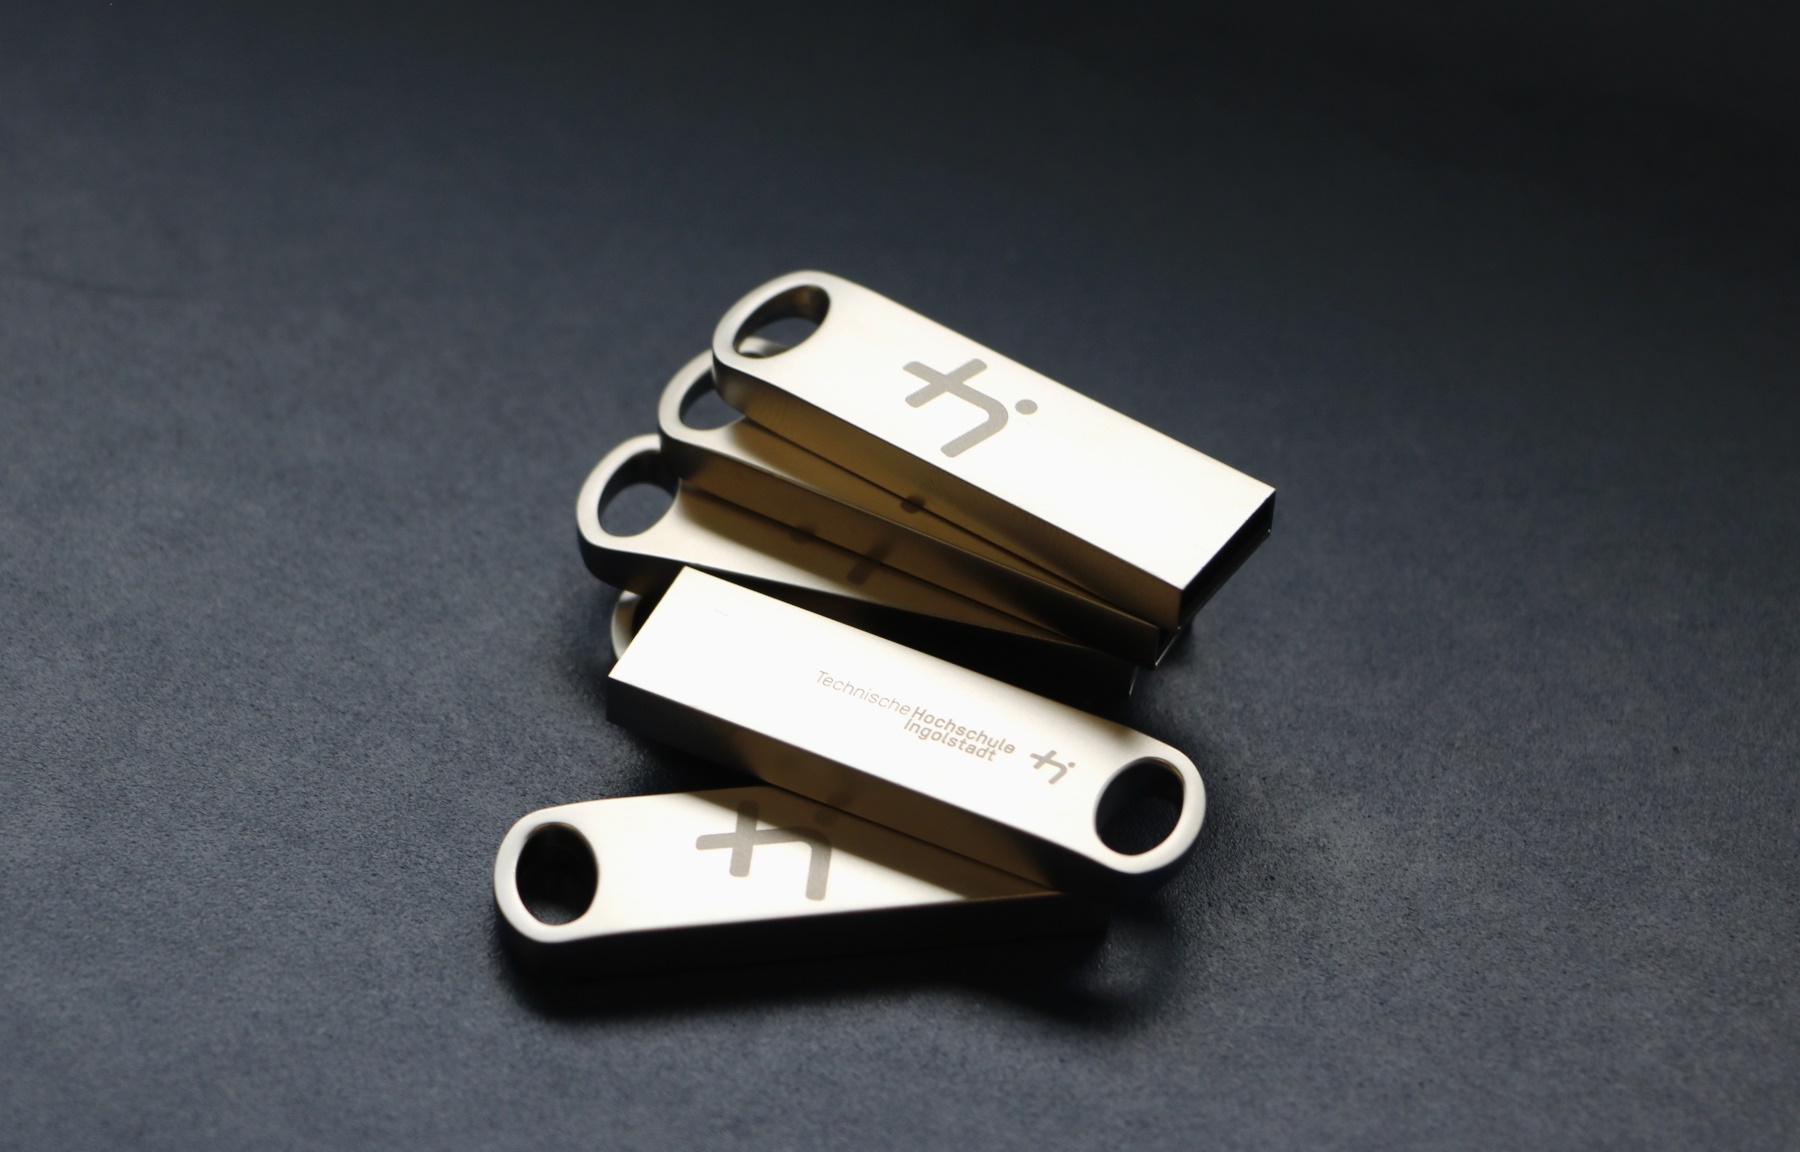 A stack of metal USB sticks with THI embossing